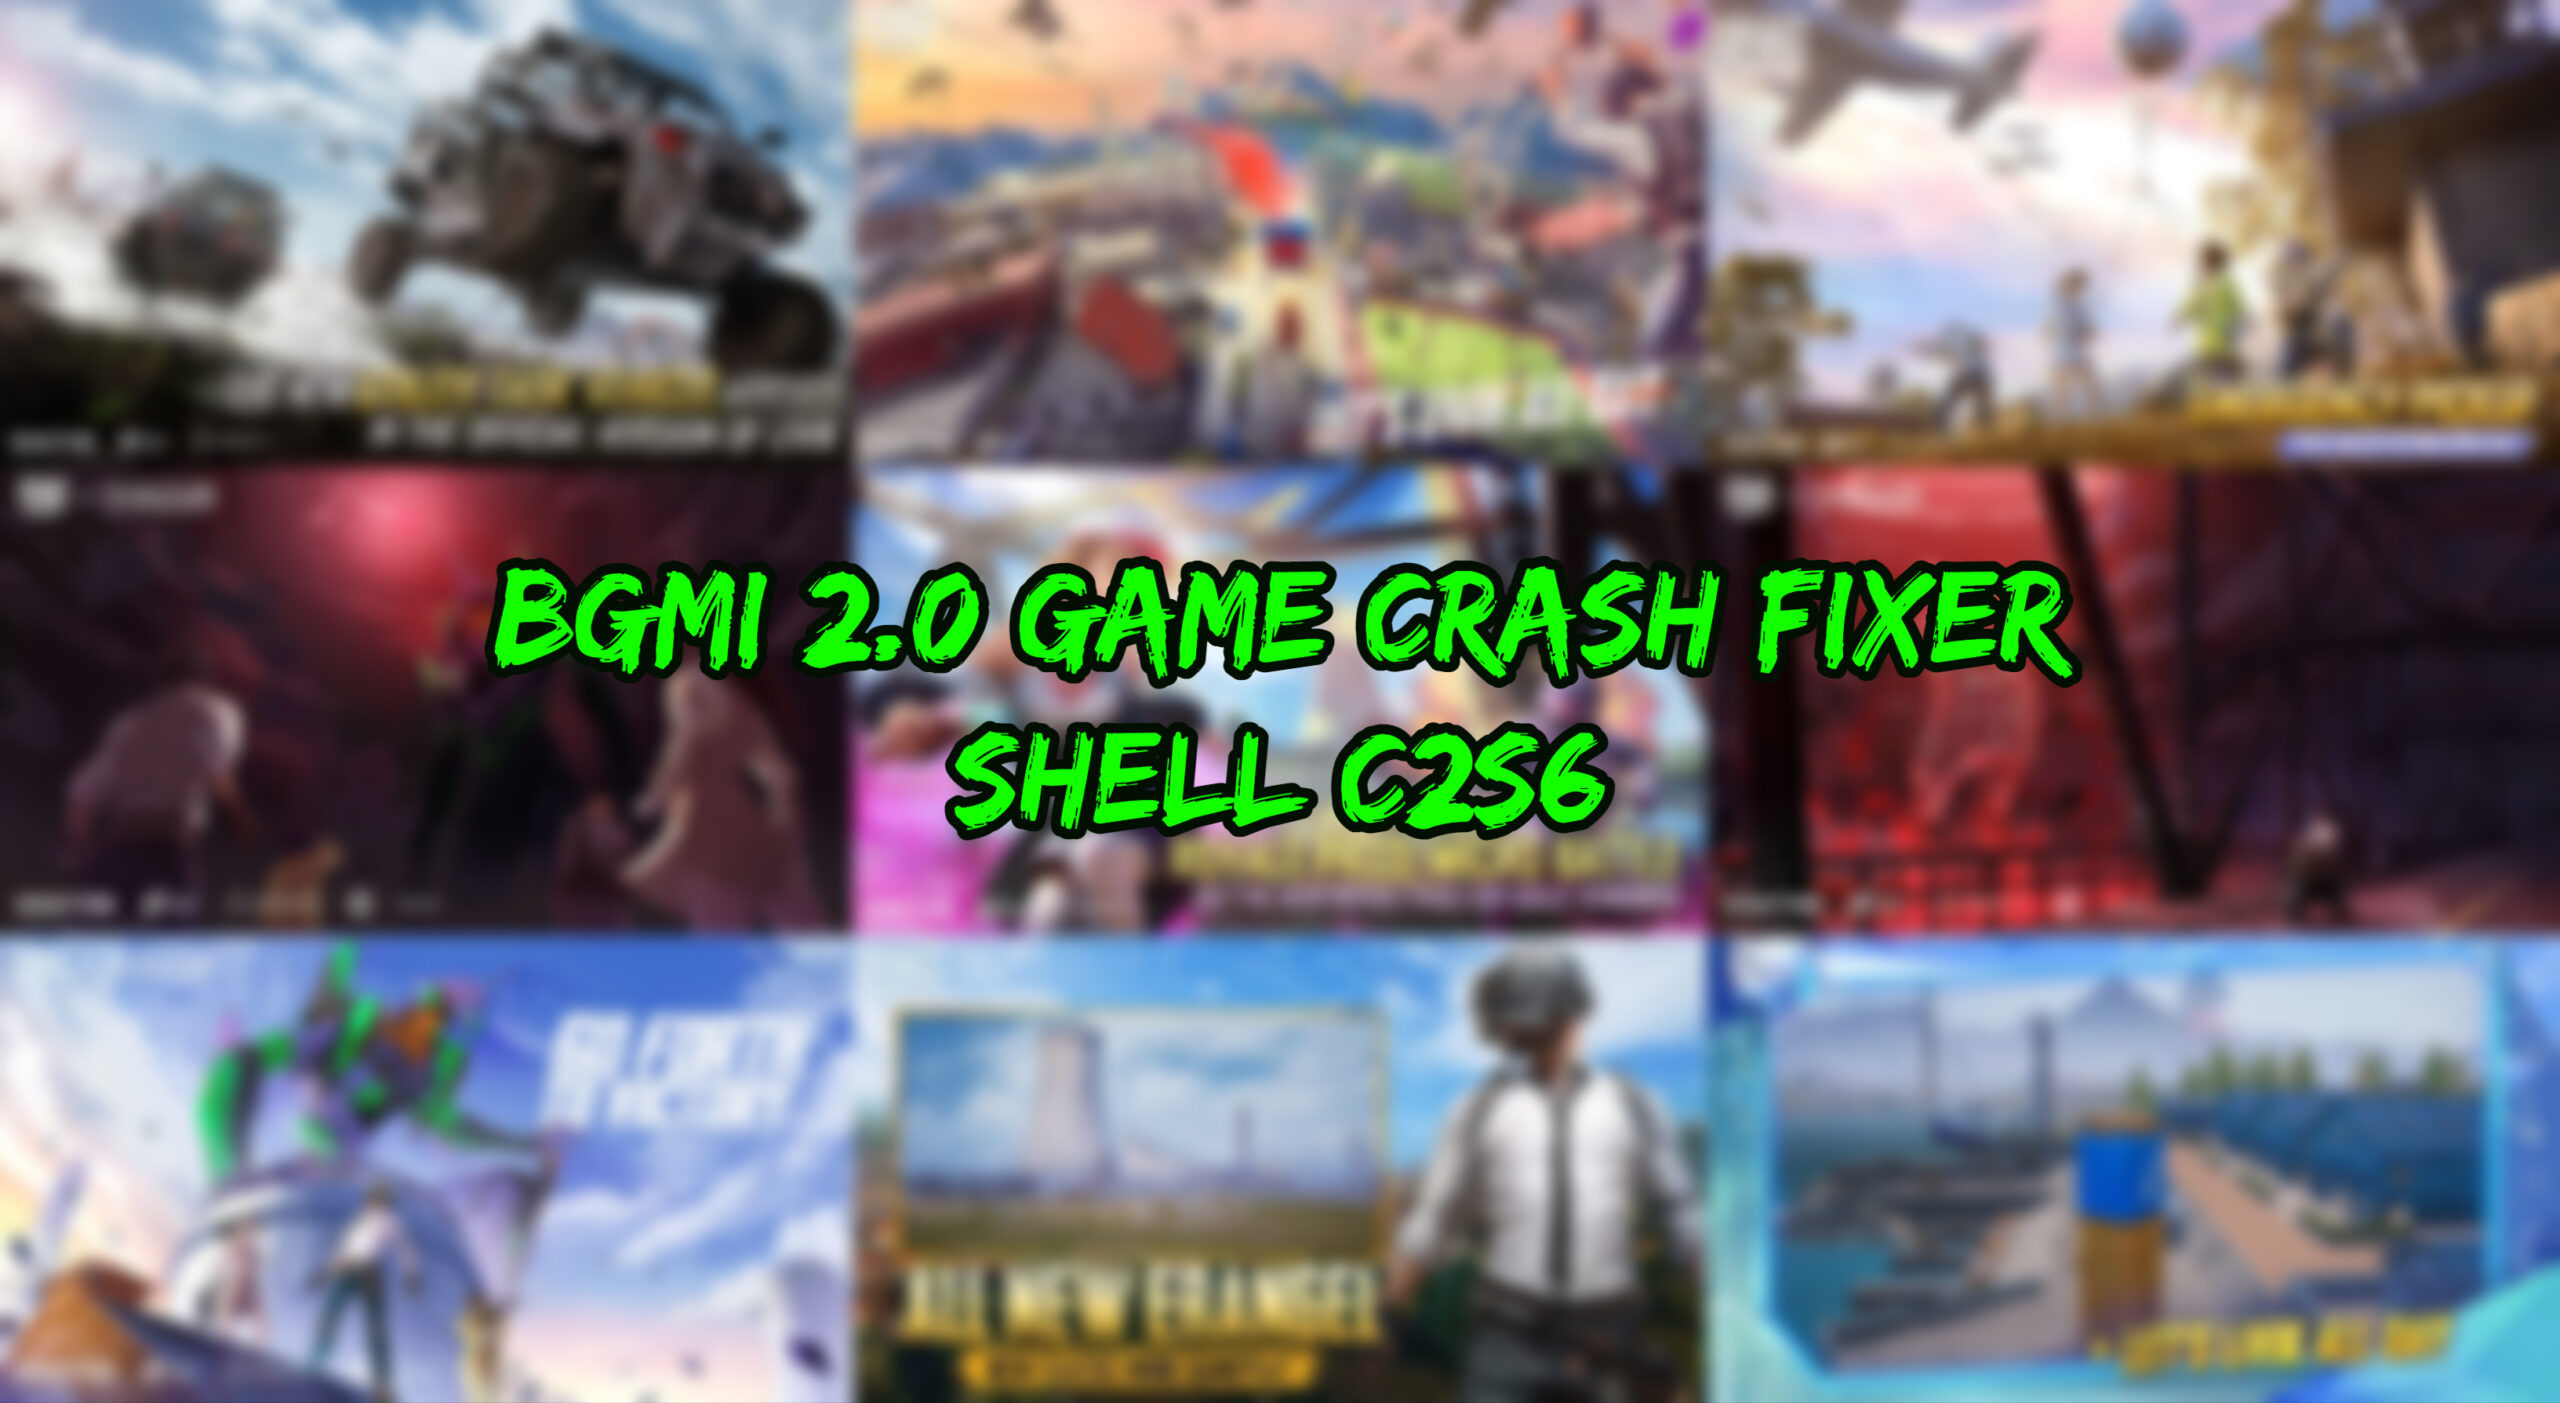 You are currently viewing BGMI 2.0 Game Crash Fixer Shell C2S6